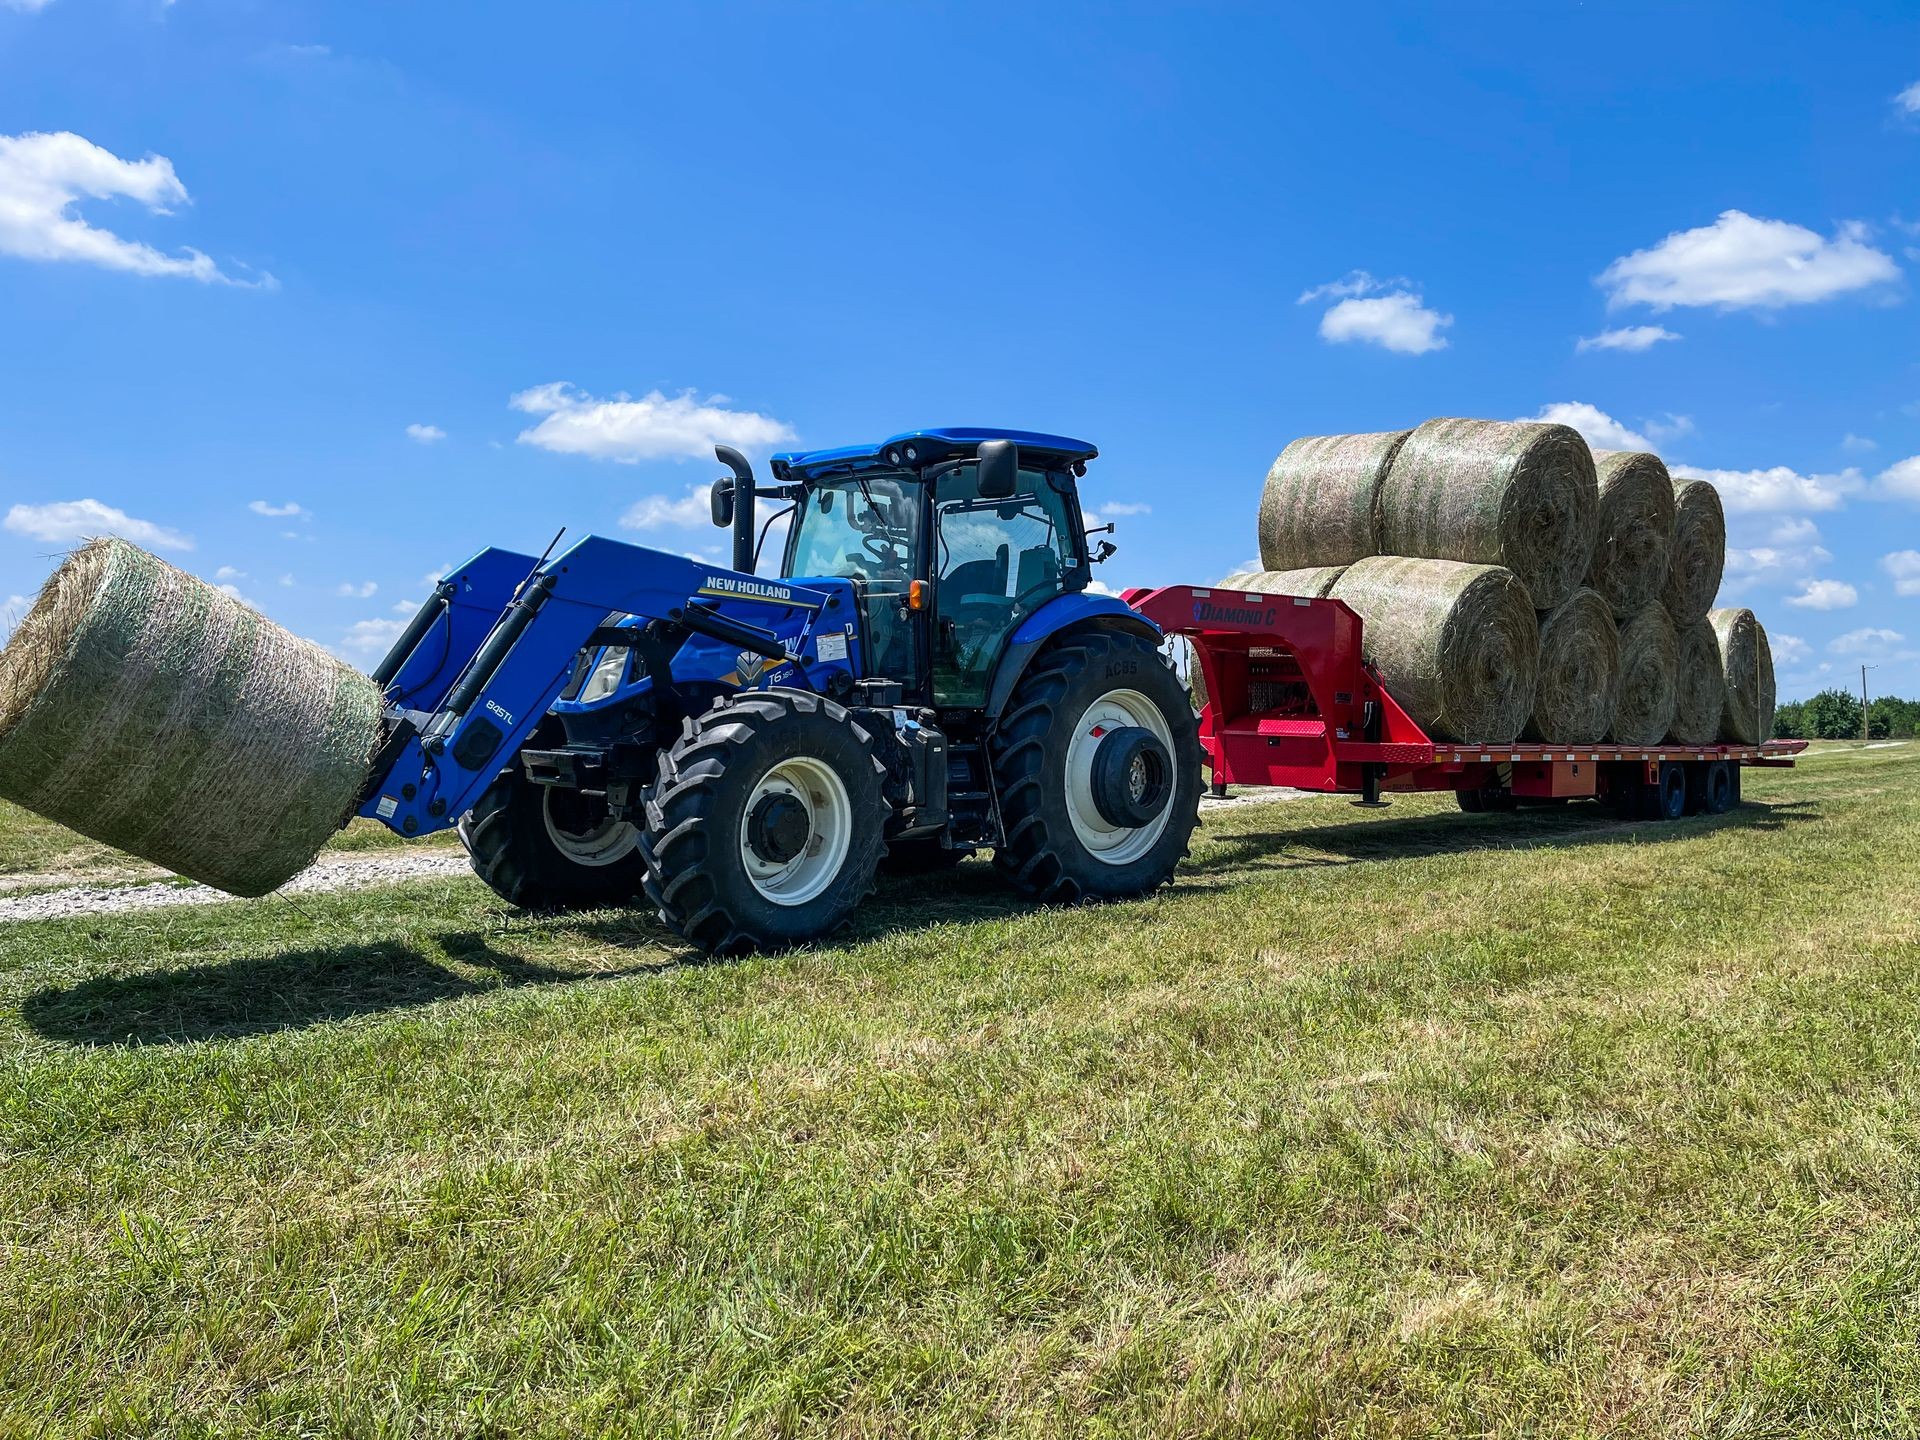 tractor pulling round bales from a field